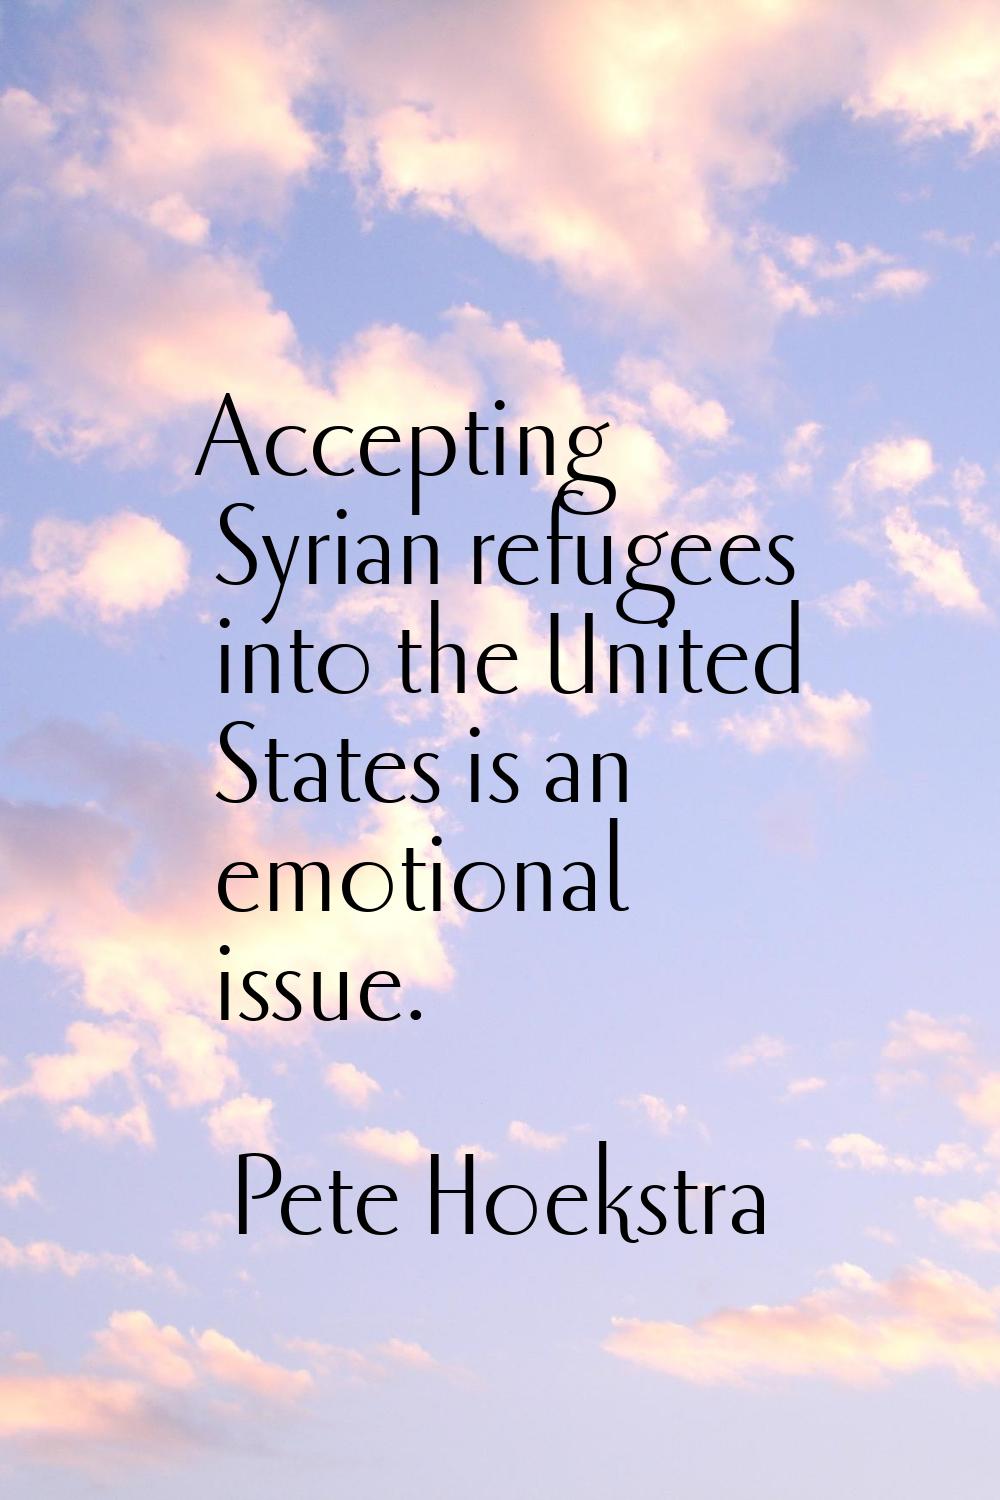 Accepting Syrian refugees into the United States is an emotional issue.